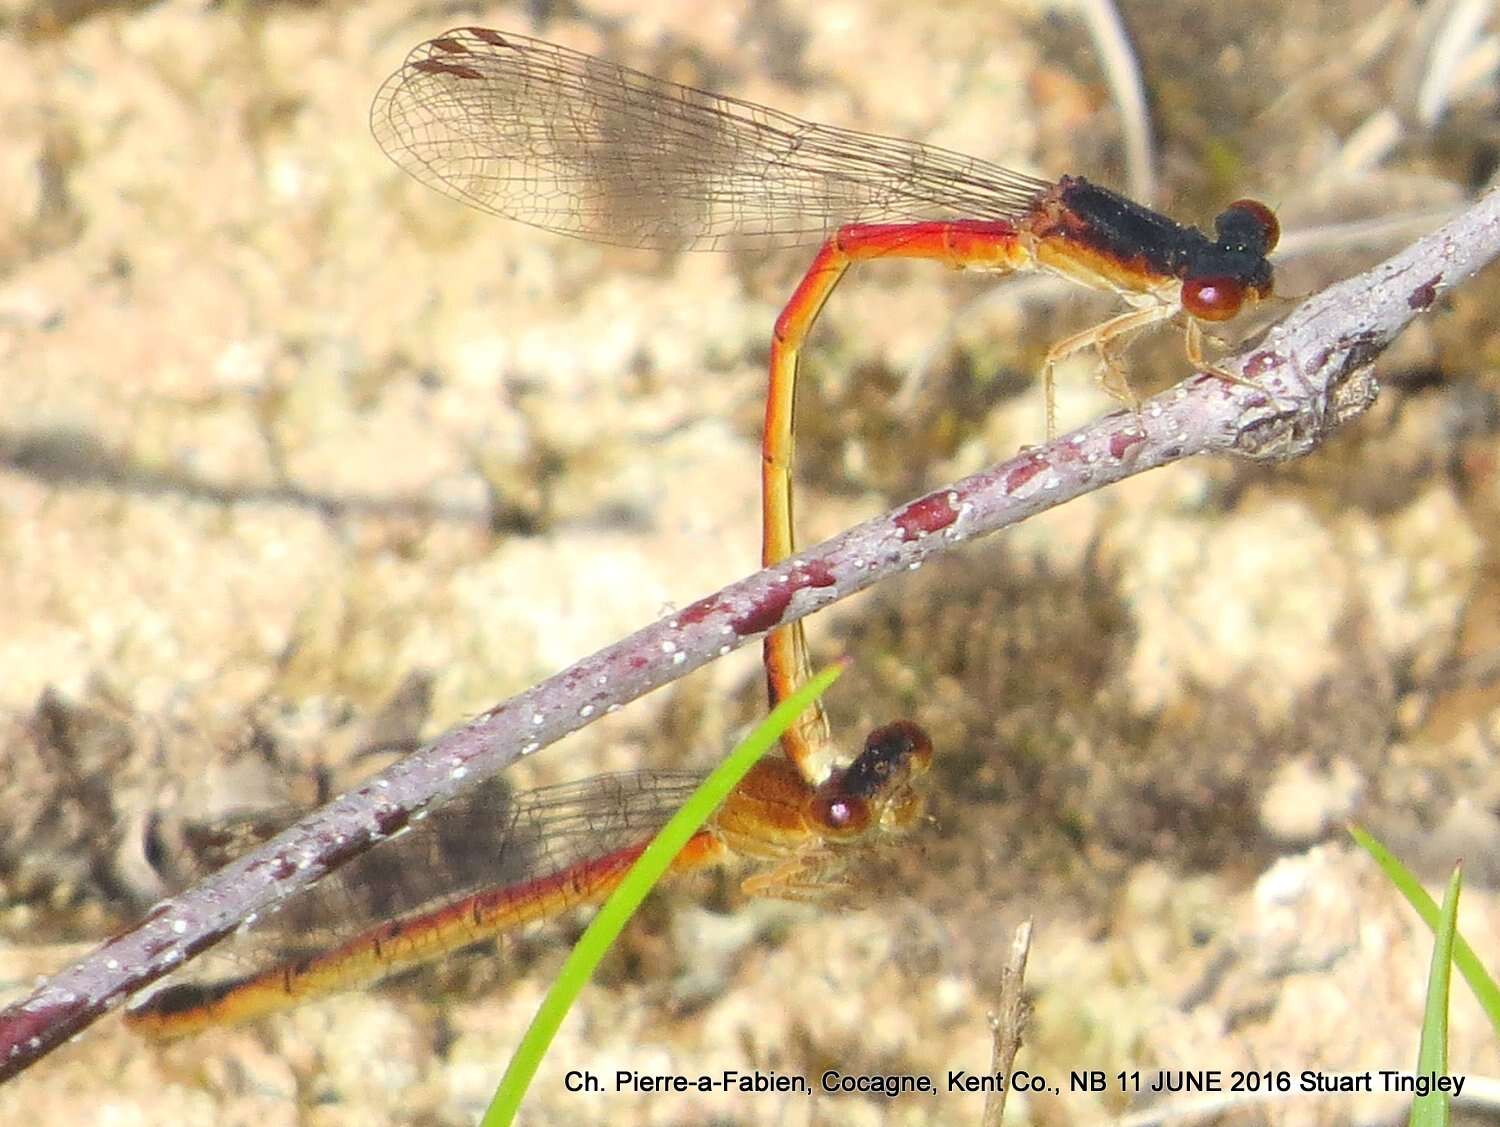 Image of Red Damsels